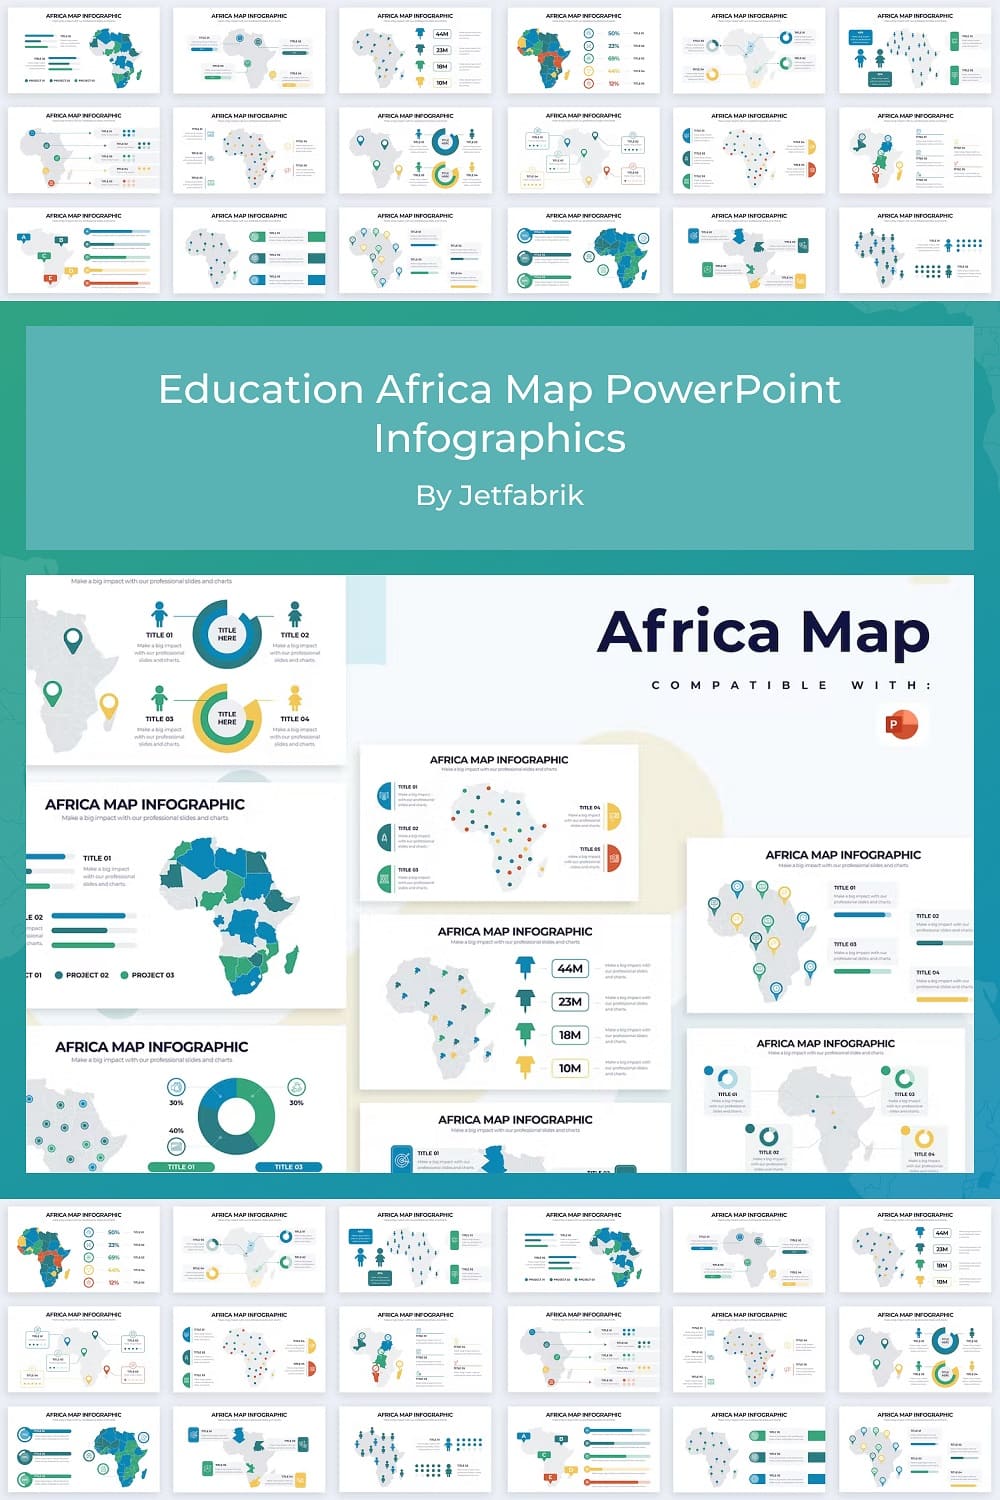 Education Africa map powerpoint infographics by Jetfabric.